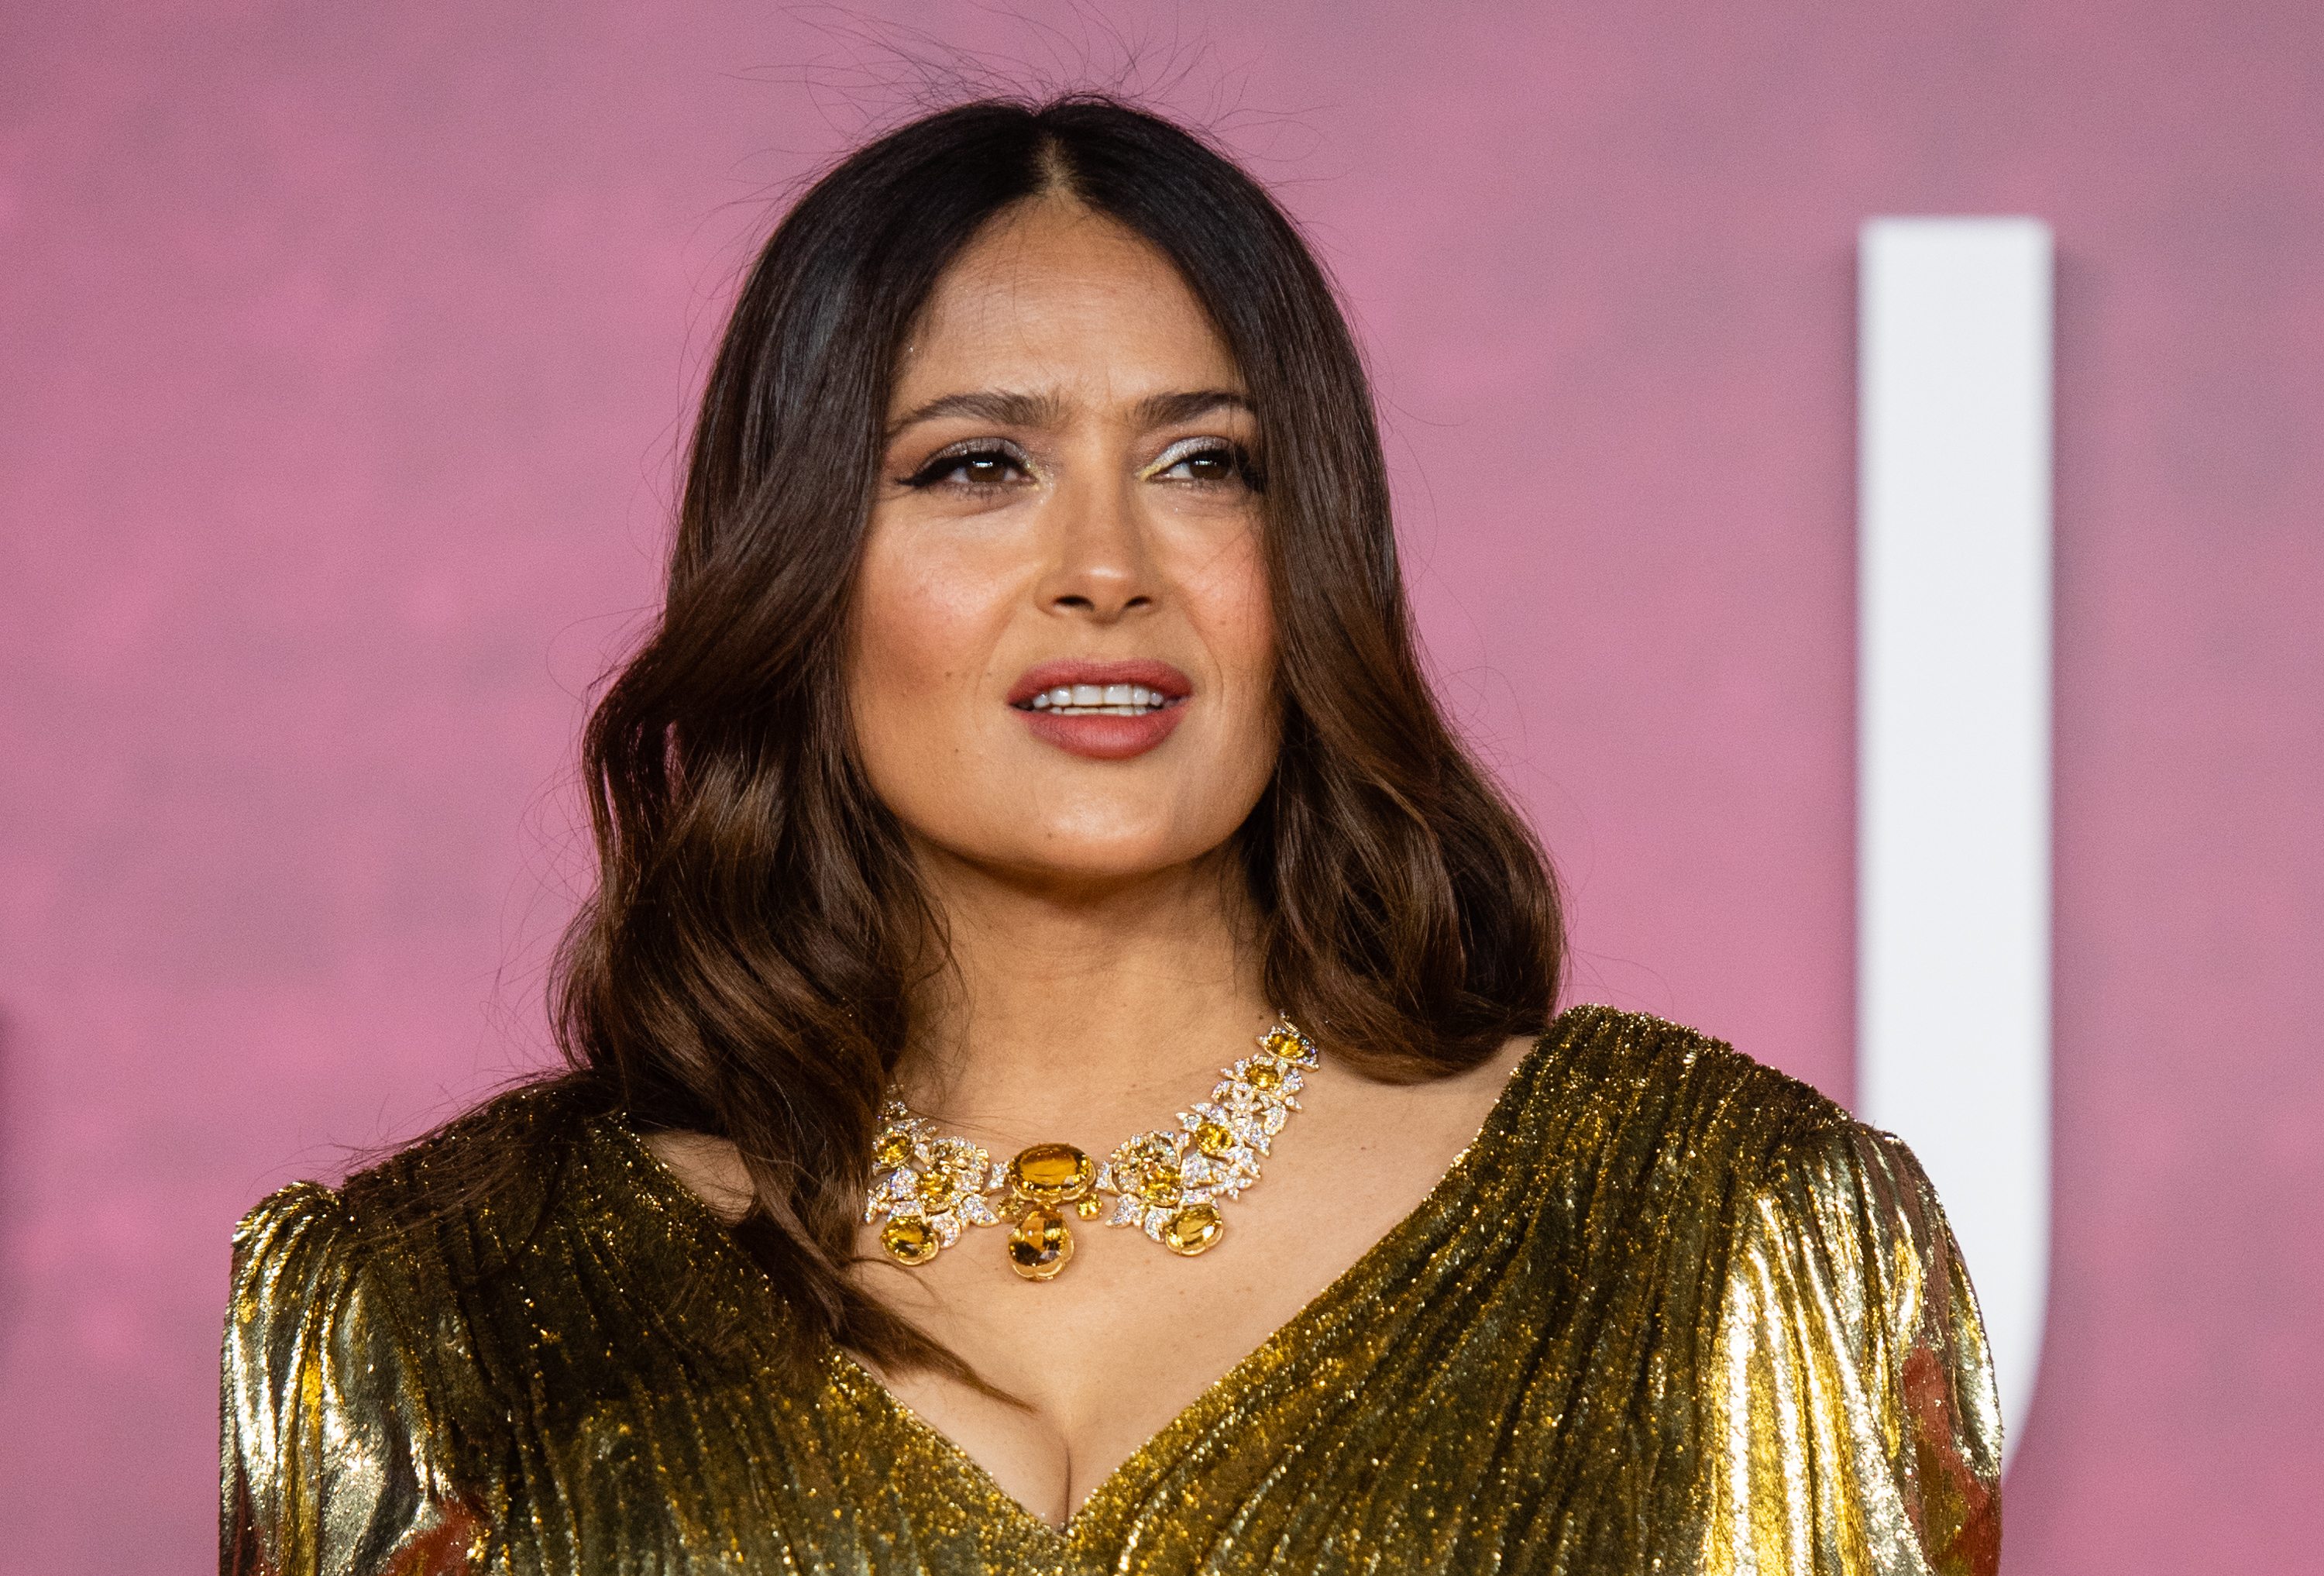 LONDON, ENGLAND - NOVEMBER 09: Salma Hayek attends the UK Premiere Of "House of Gucci" at Odeon Luxe Leicester Square on November 09, 2021 in London, England. (Photo by Samir Hussein/WireImage)